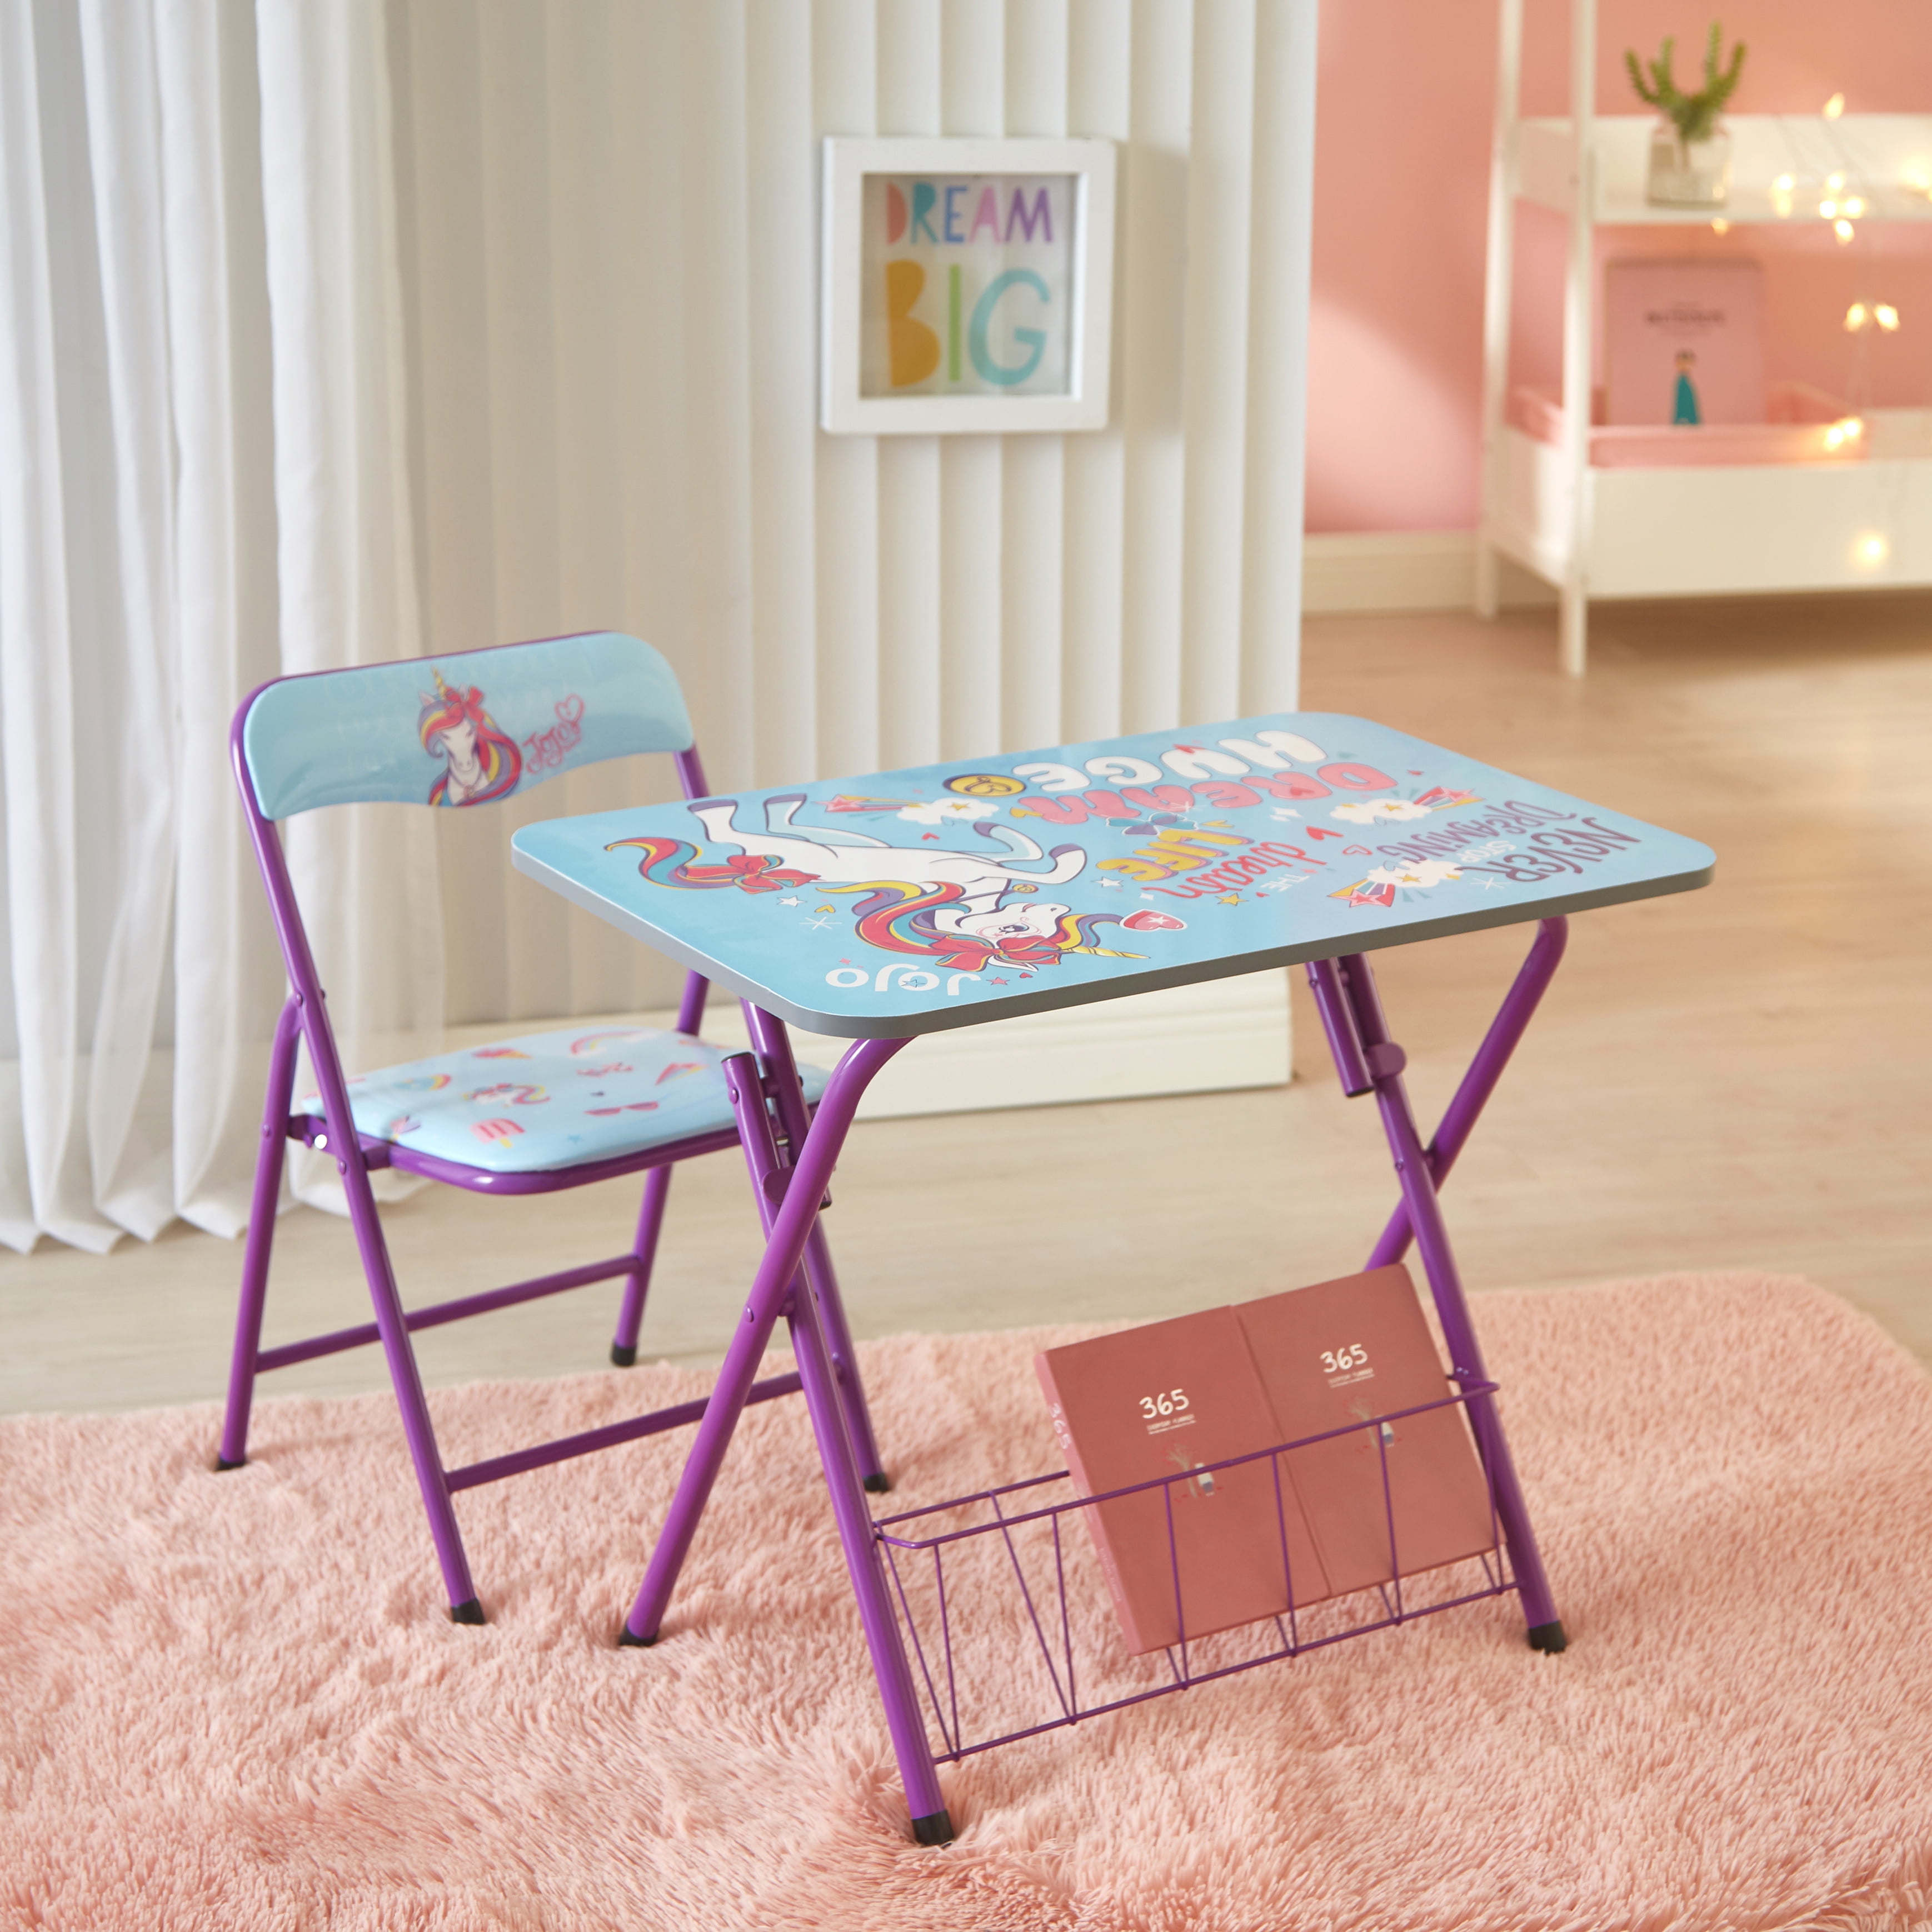 Children's Desk And Stool Natural White Pink Blue MDF Wood With Hinged Lid New 